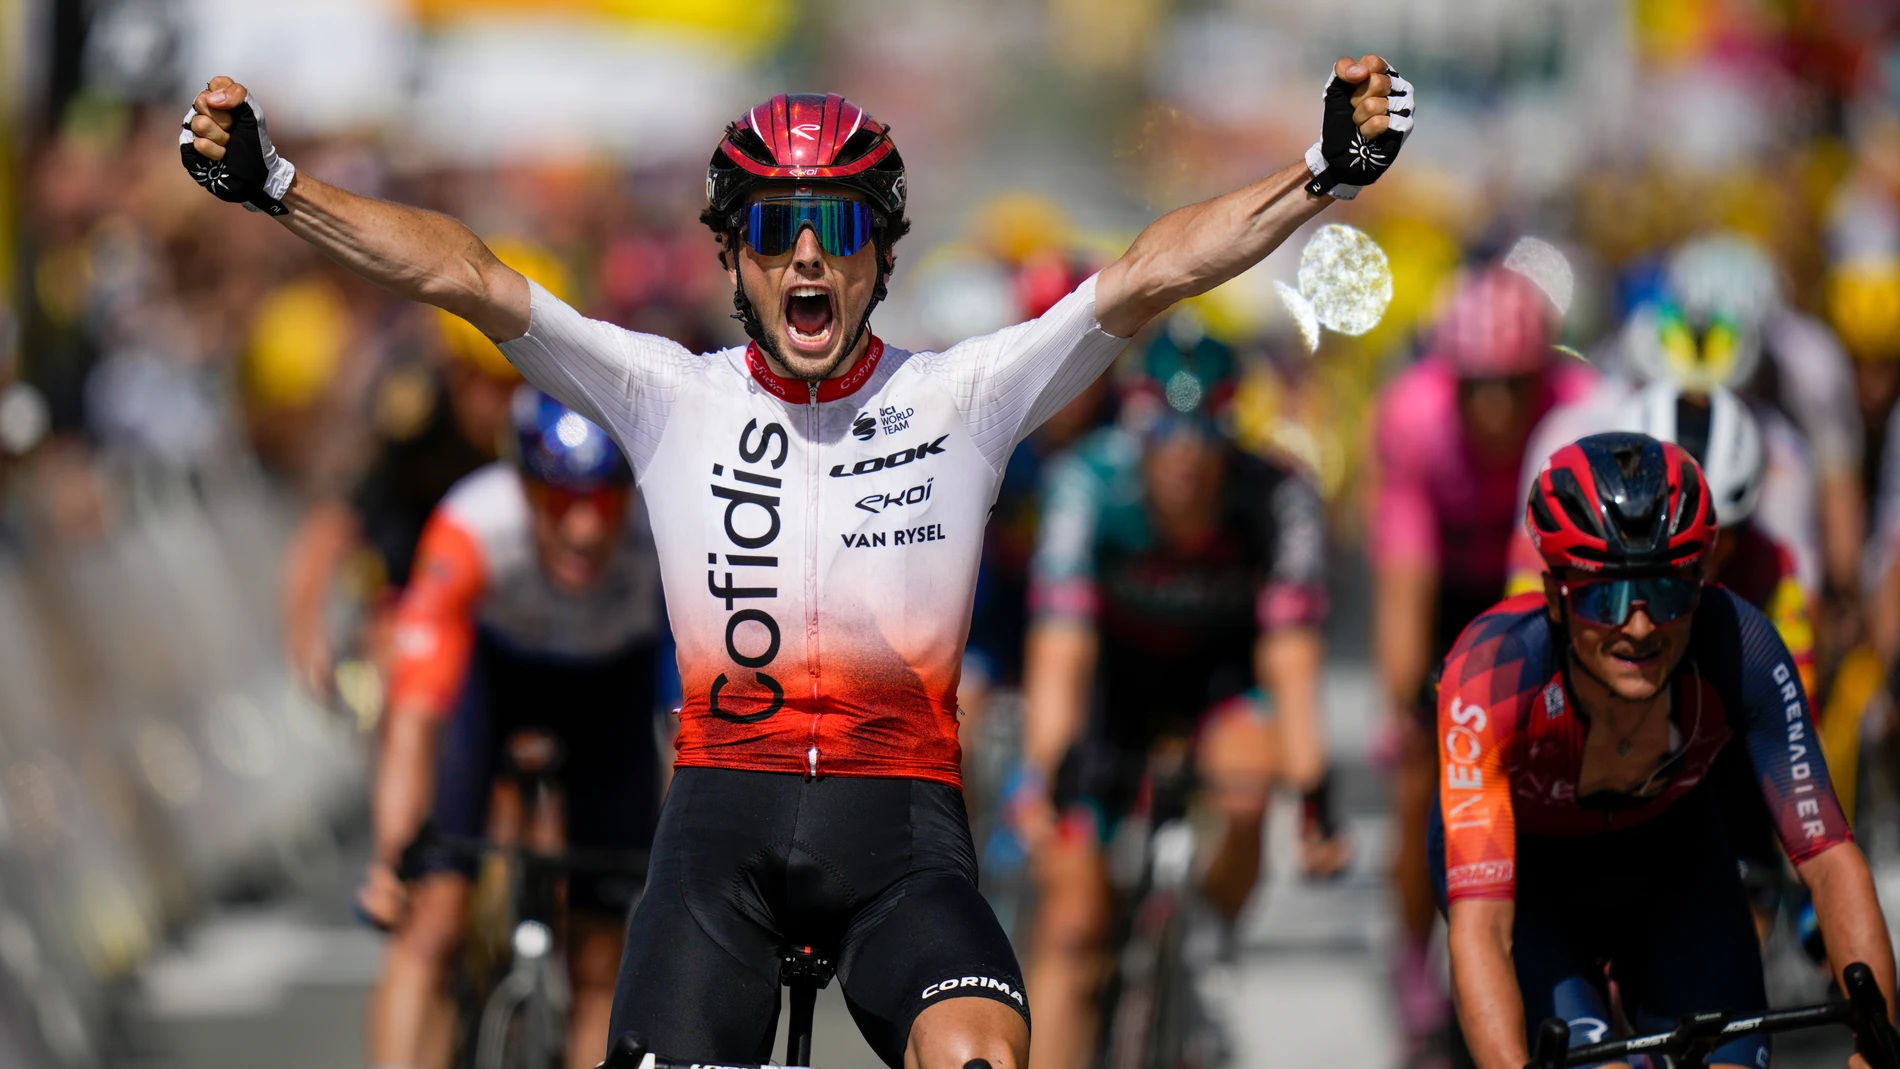 France's Victor Lafay crosses the finish line ahead of fourth place Britain's Thomas Pidcock, right, to win the second stage of the Tour de France cycling race over 209 kilometers (130 miles) with start in Vitoria Gasteiz and finish in San Sebastian, Spain, Sunday, July 2, 2023. (AP Photo/Daniel Cole)